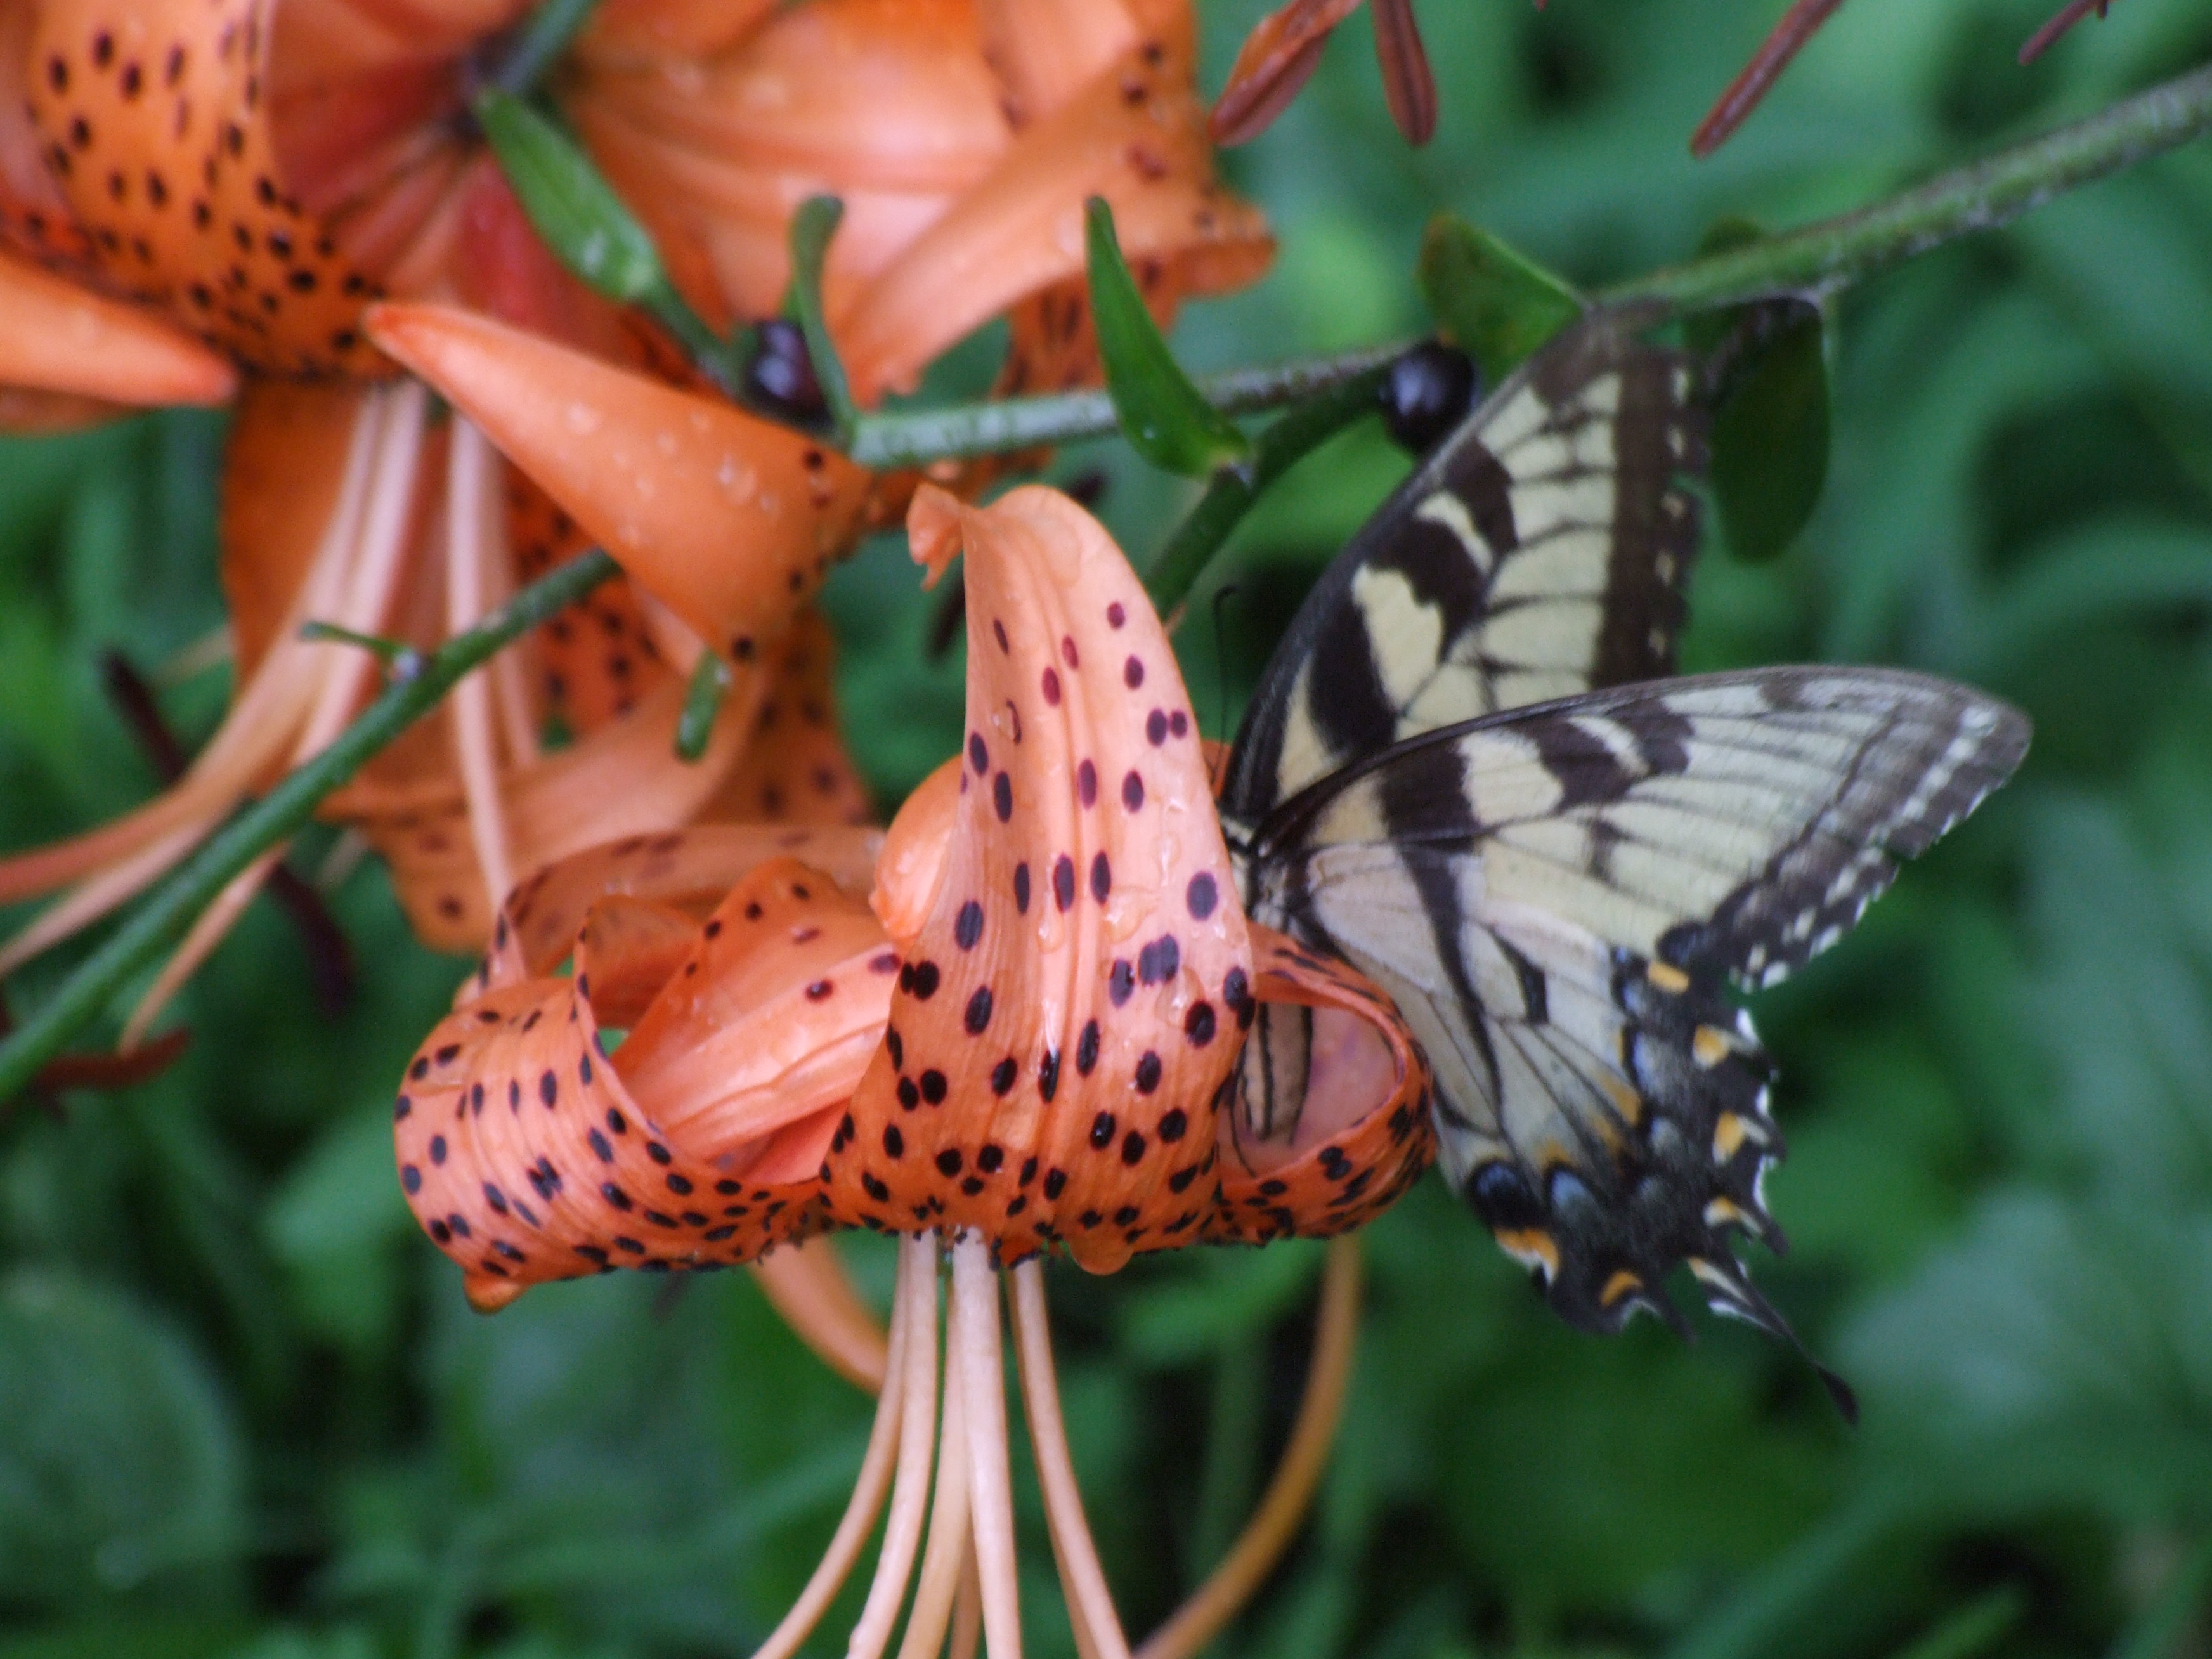 Tiger Lily and Swallowtail by Athenazero